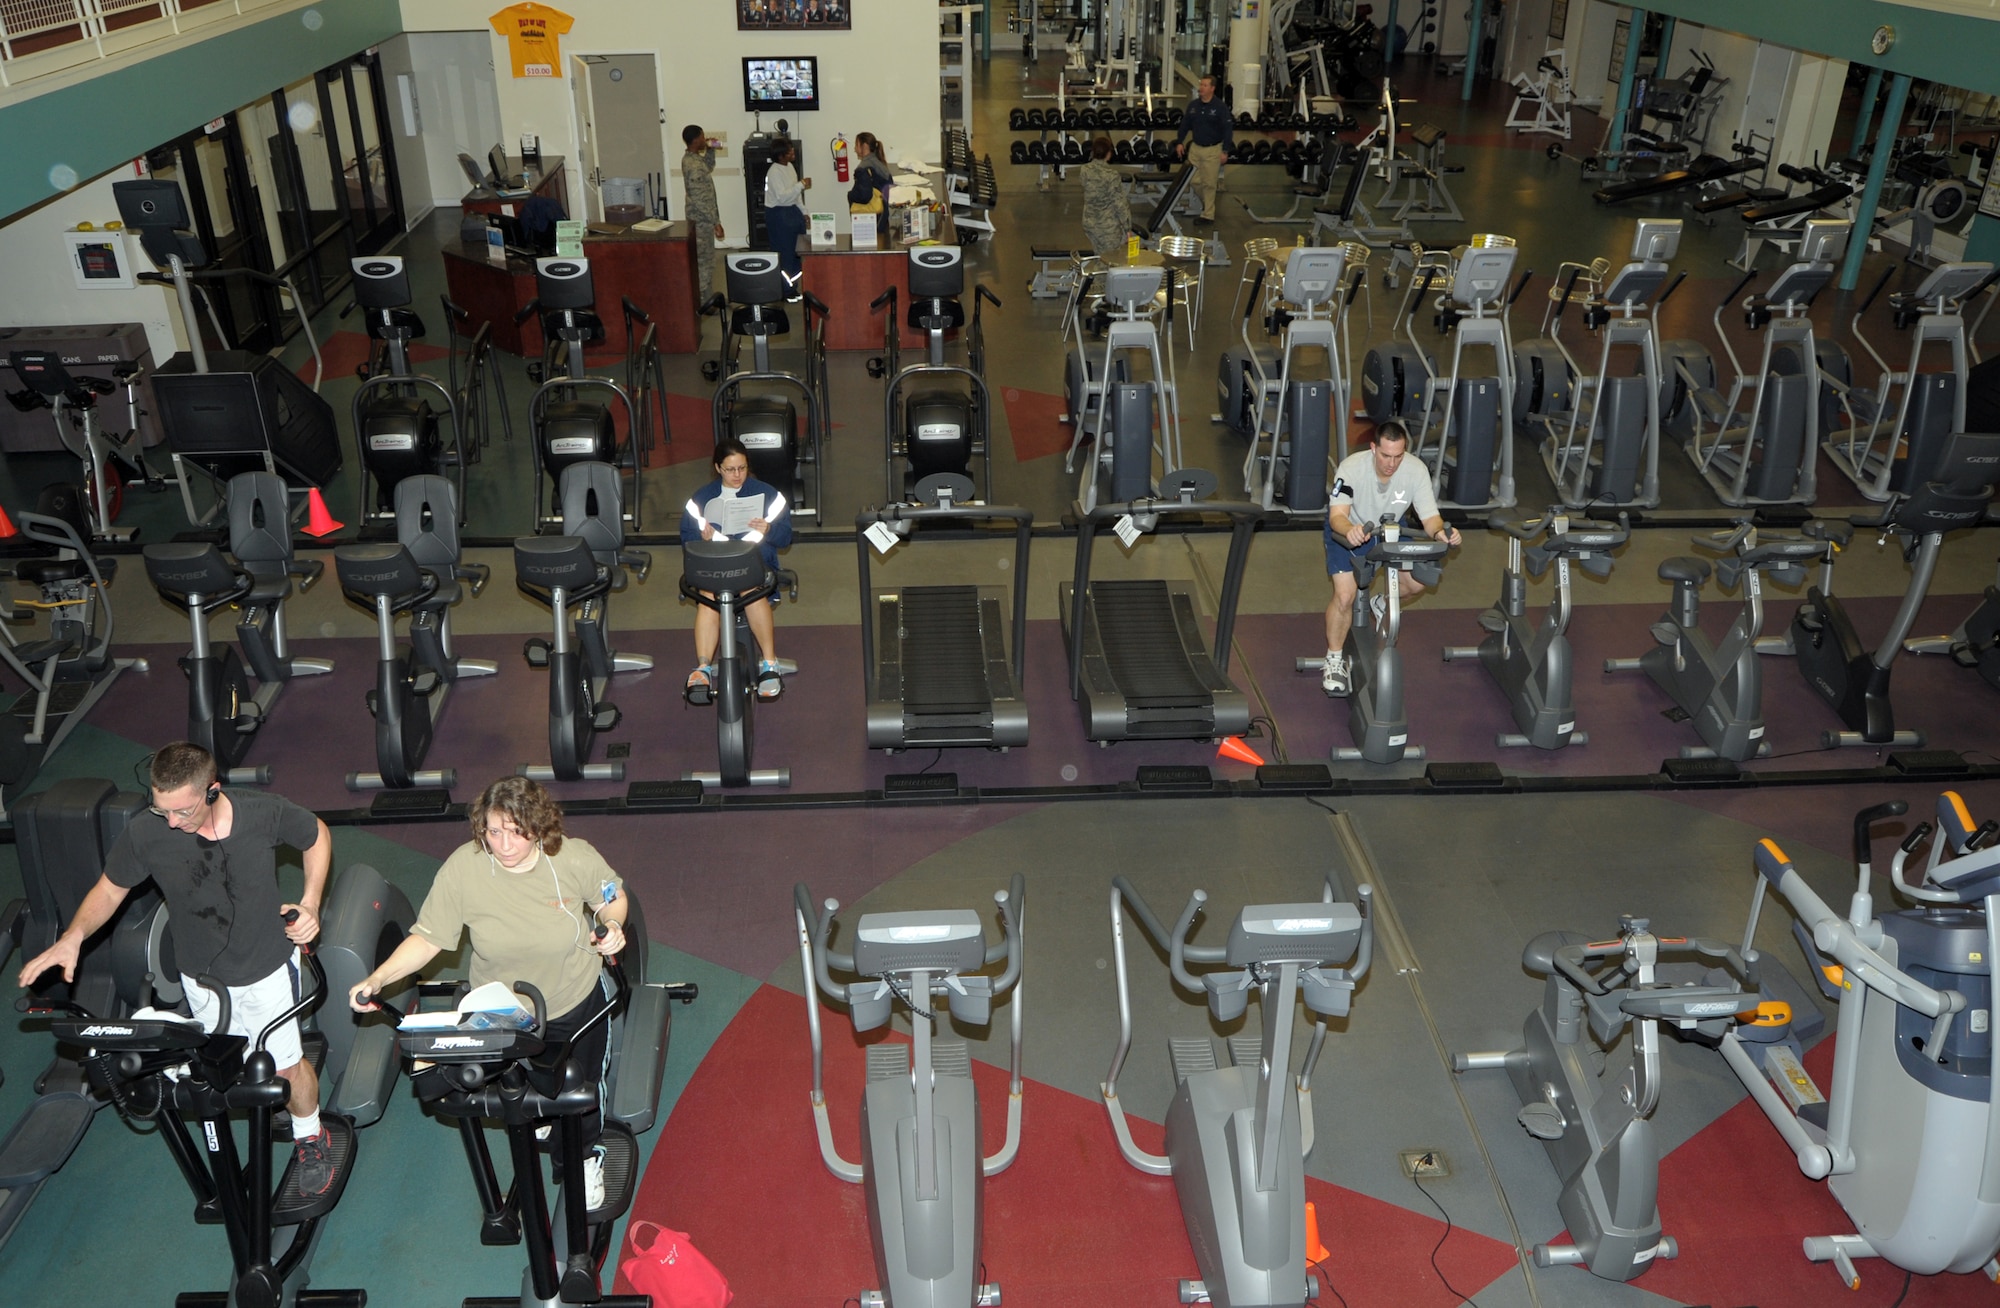 Fitness Center patrons work out Tuesday at 8:30 a.m. on base. Scott AFB was selected as a test base for 24-hour Fitness Center access. (U.S. Air Force photo/Staff Sgt. Stephenie Wade)